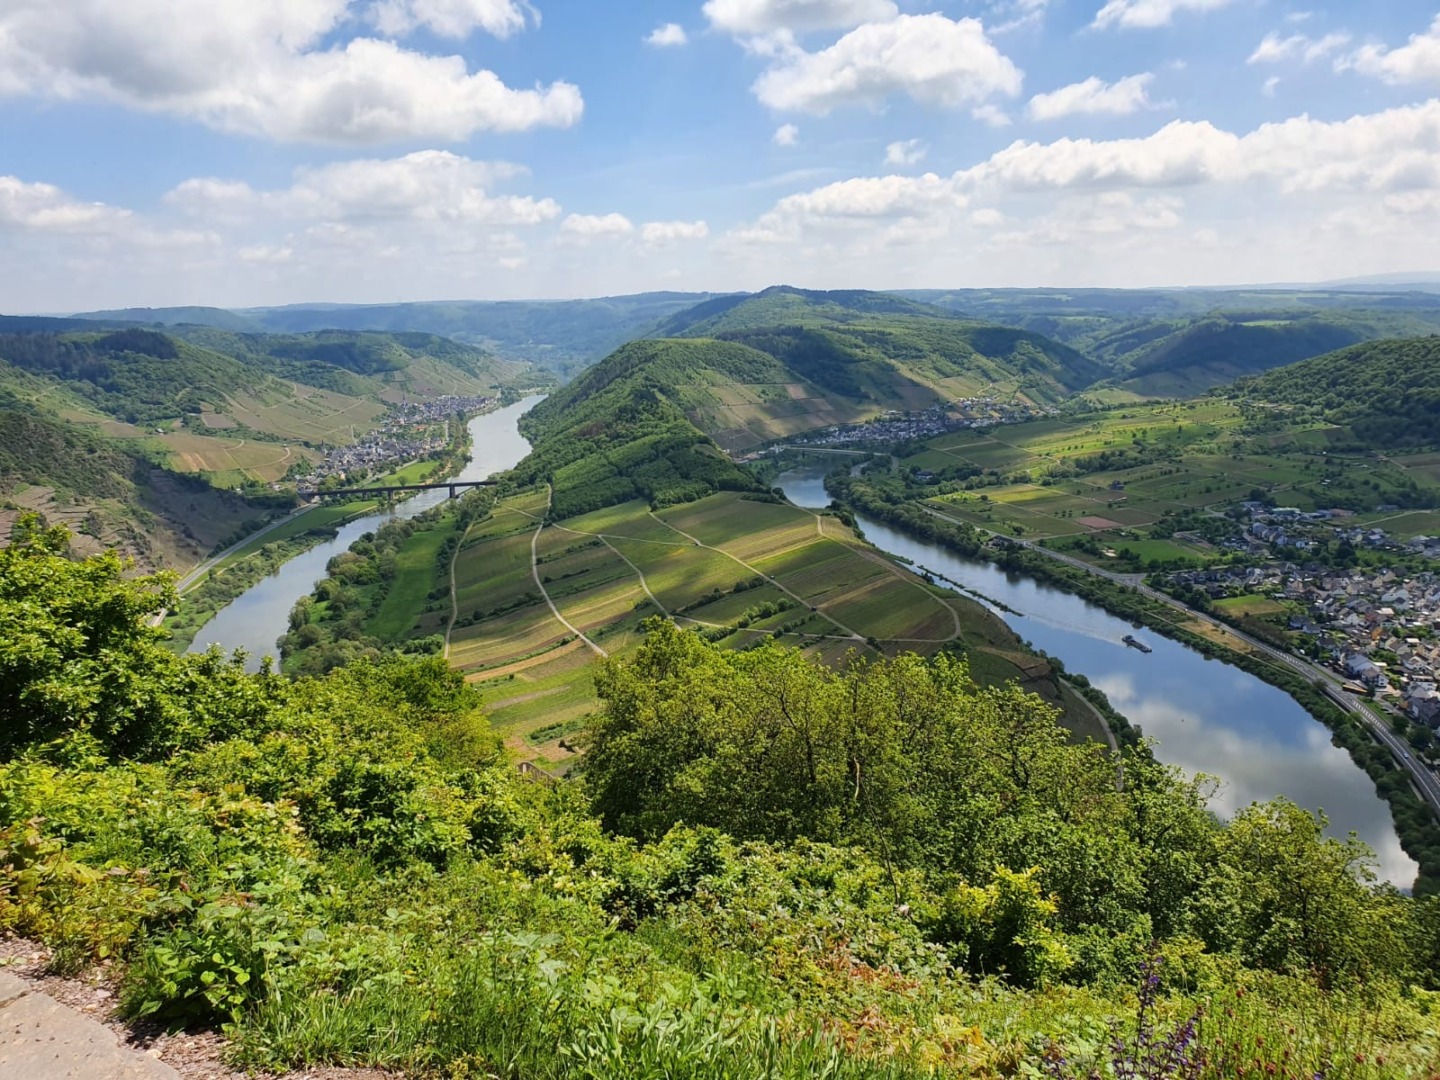 The Moselle Region1